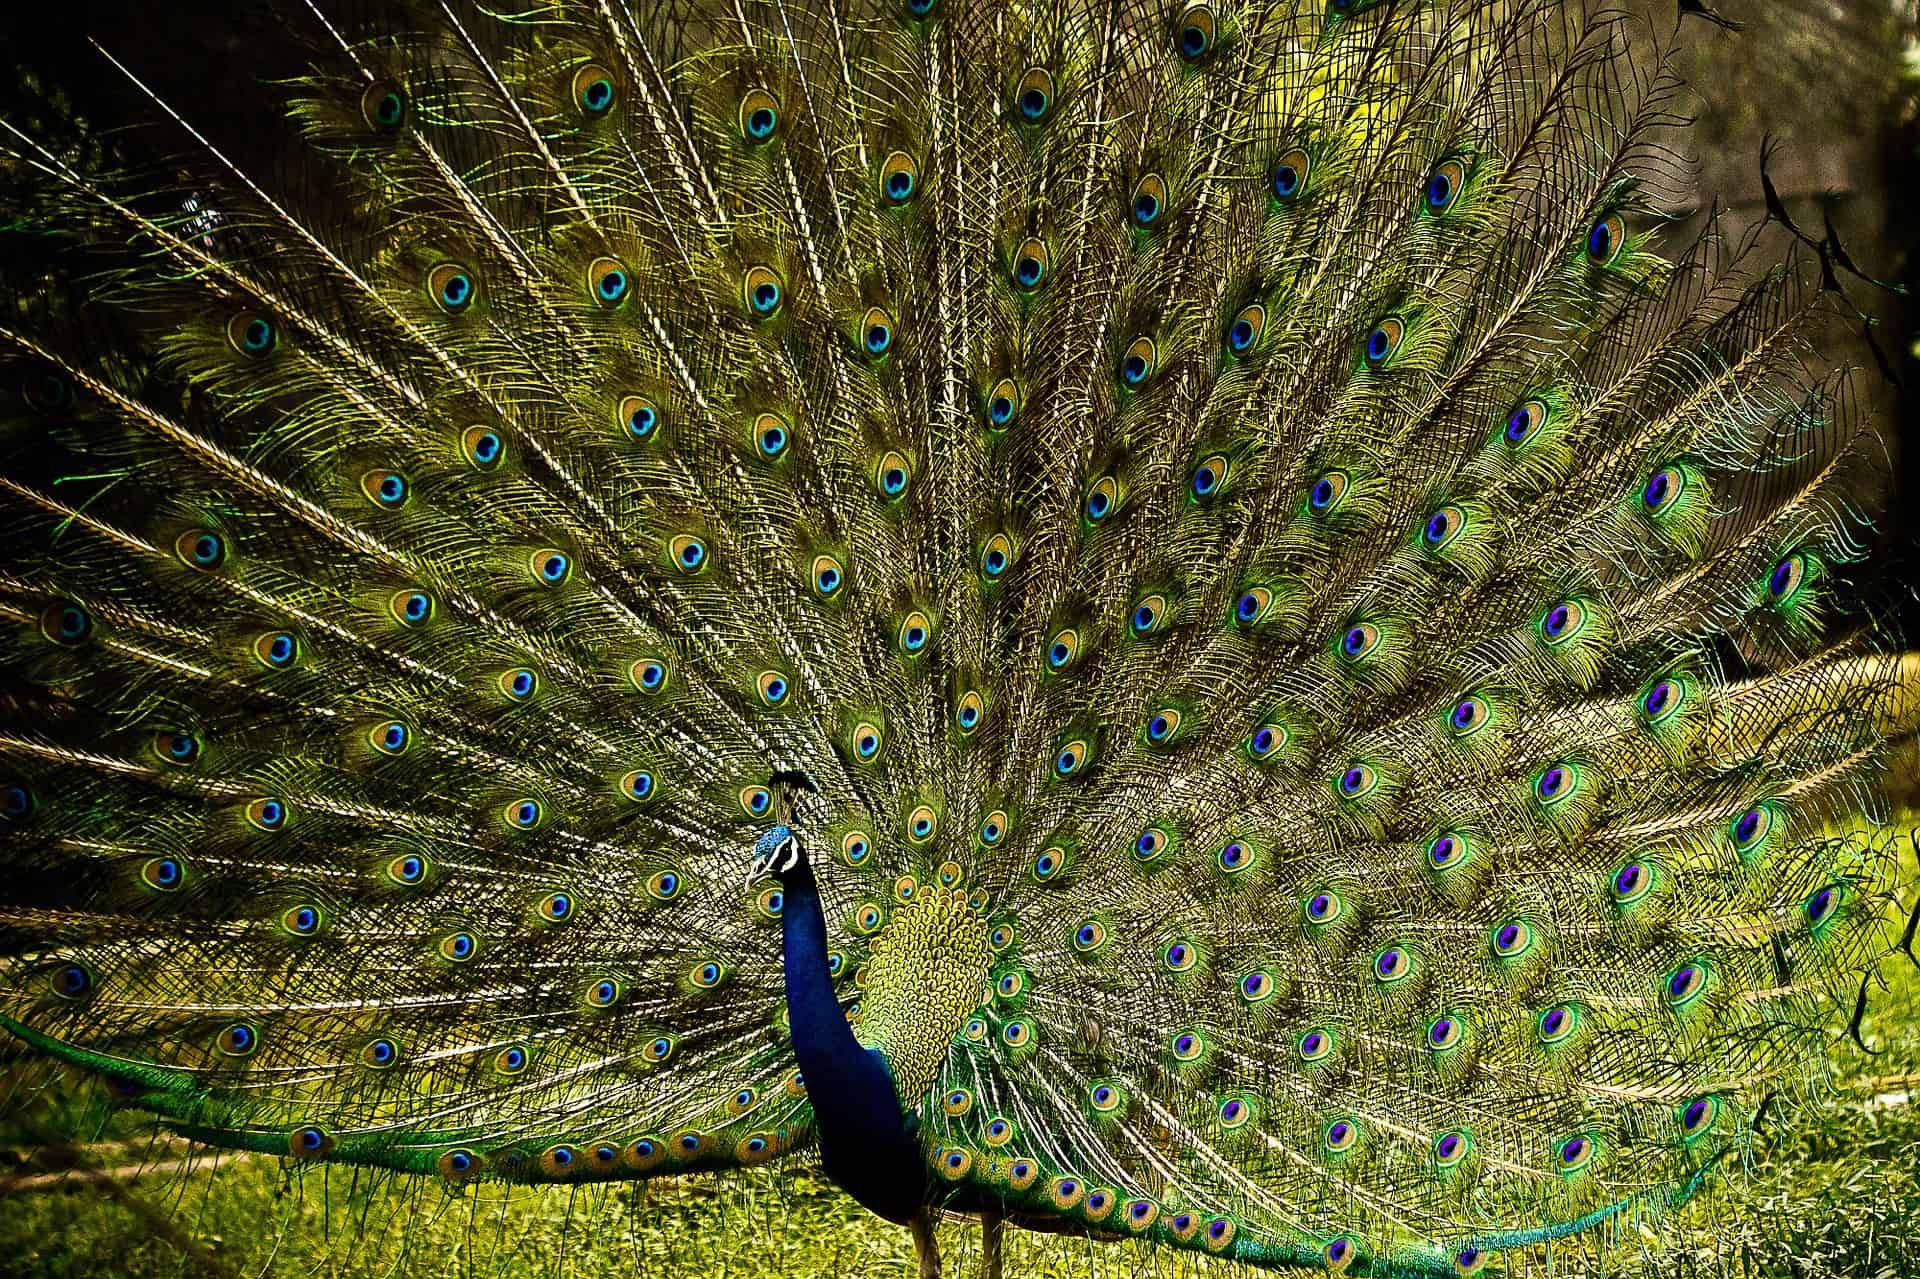 50 Beautiful Peacock Facts You Should Not Miss